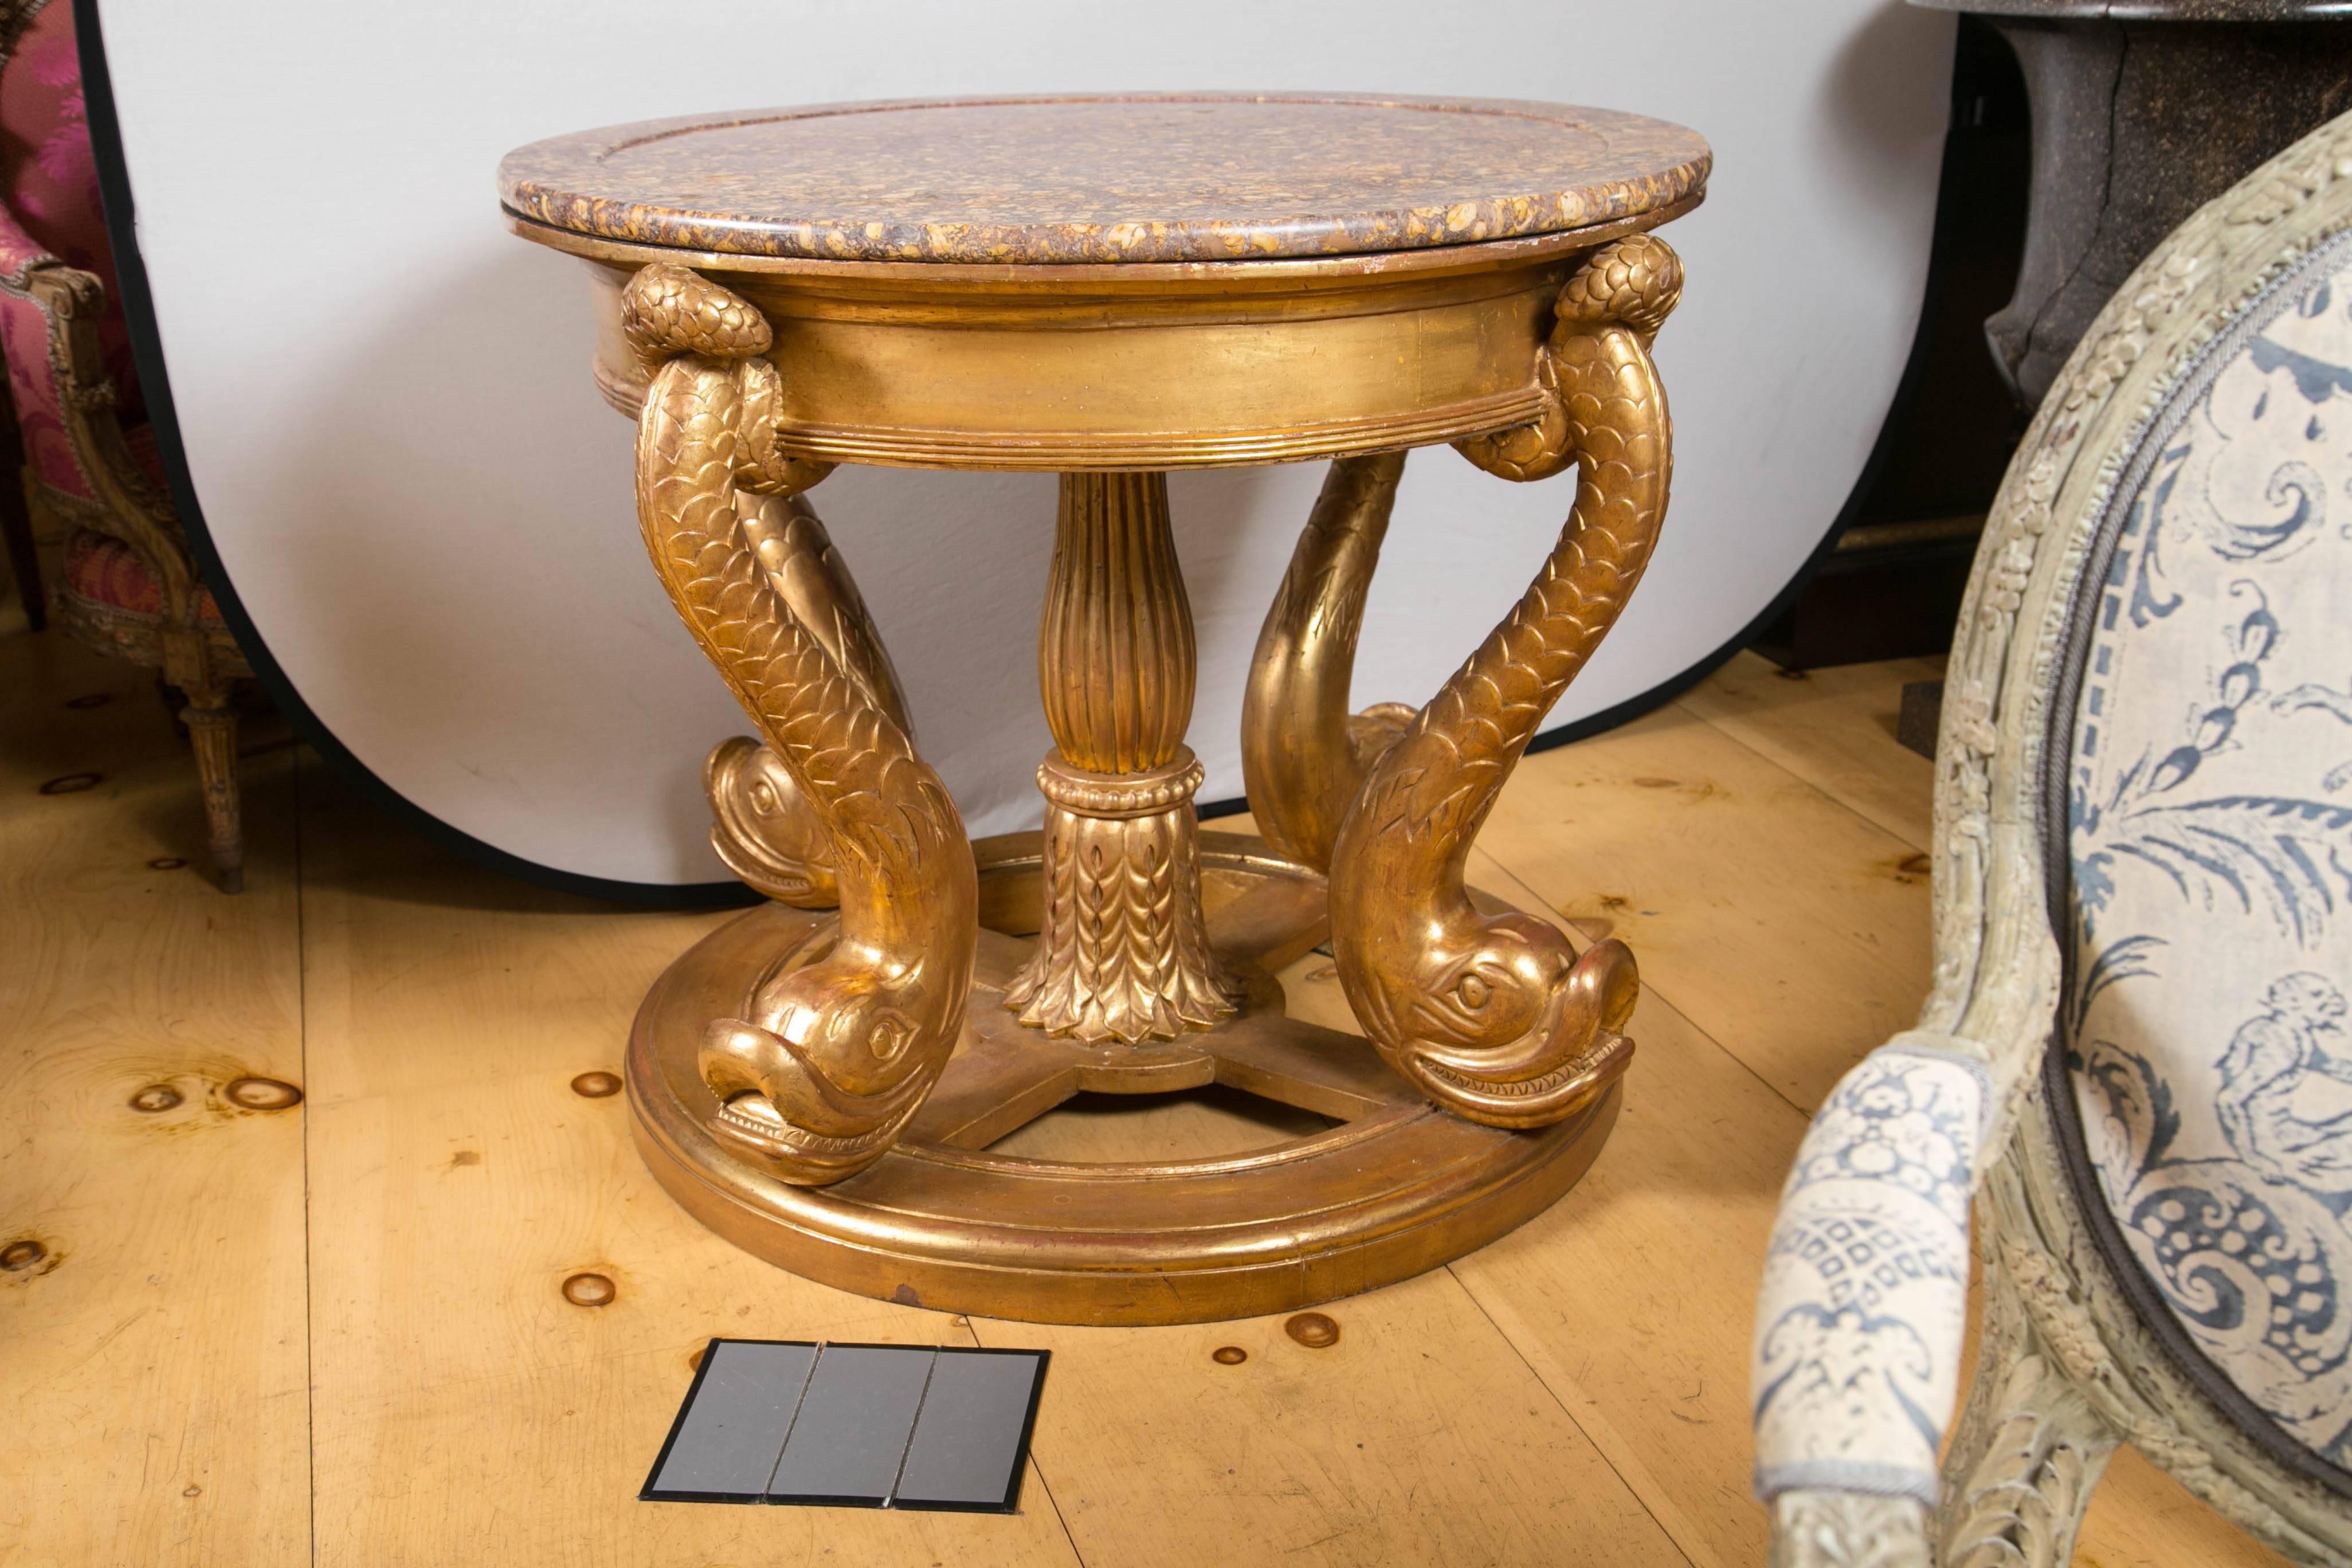 This dramatic table has a raised edge marble top. Four stylized dolphin legs with a center pedestal column are attached to the circular base.

Shipping cost is an estimate.